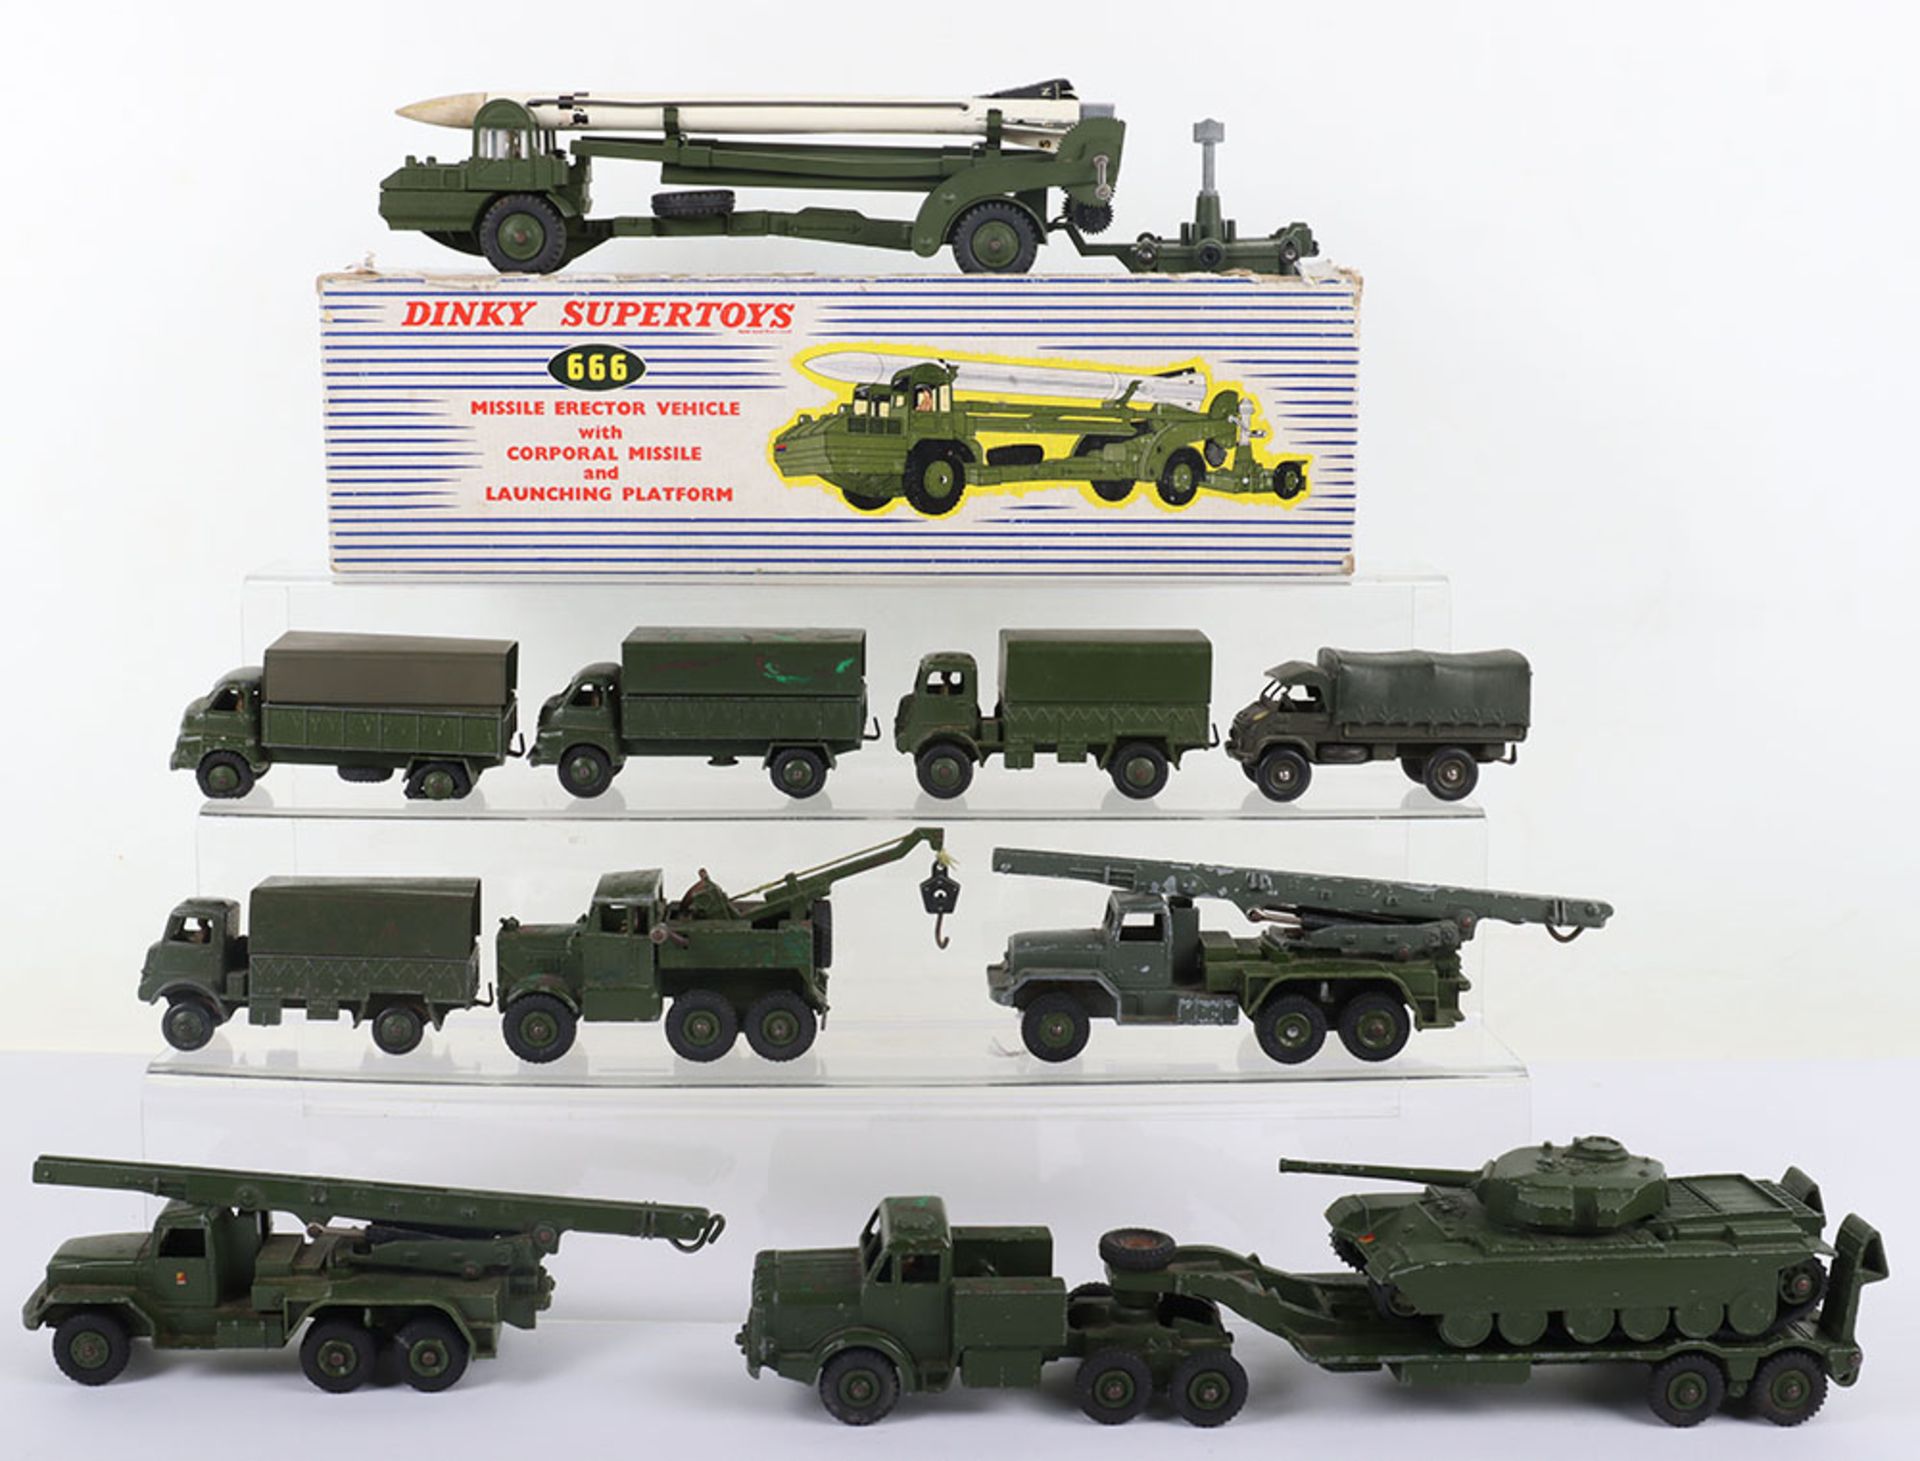 Quantity of Dinky Toys Military Models